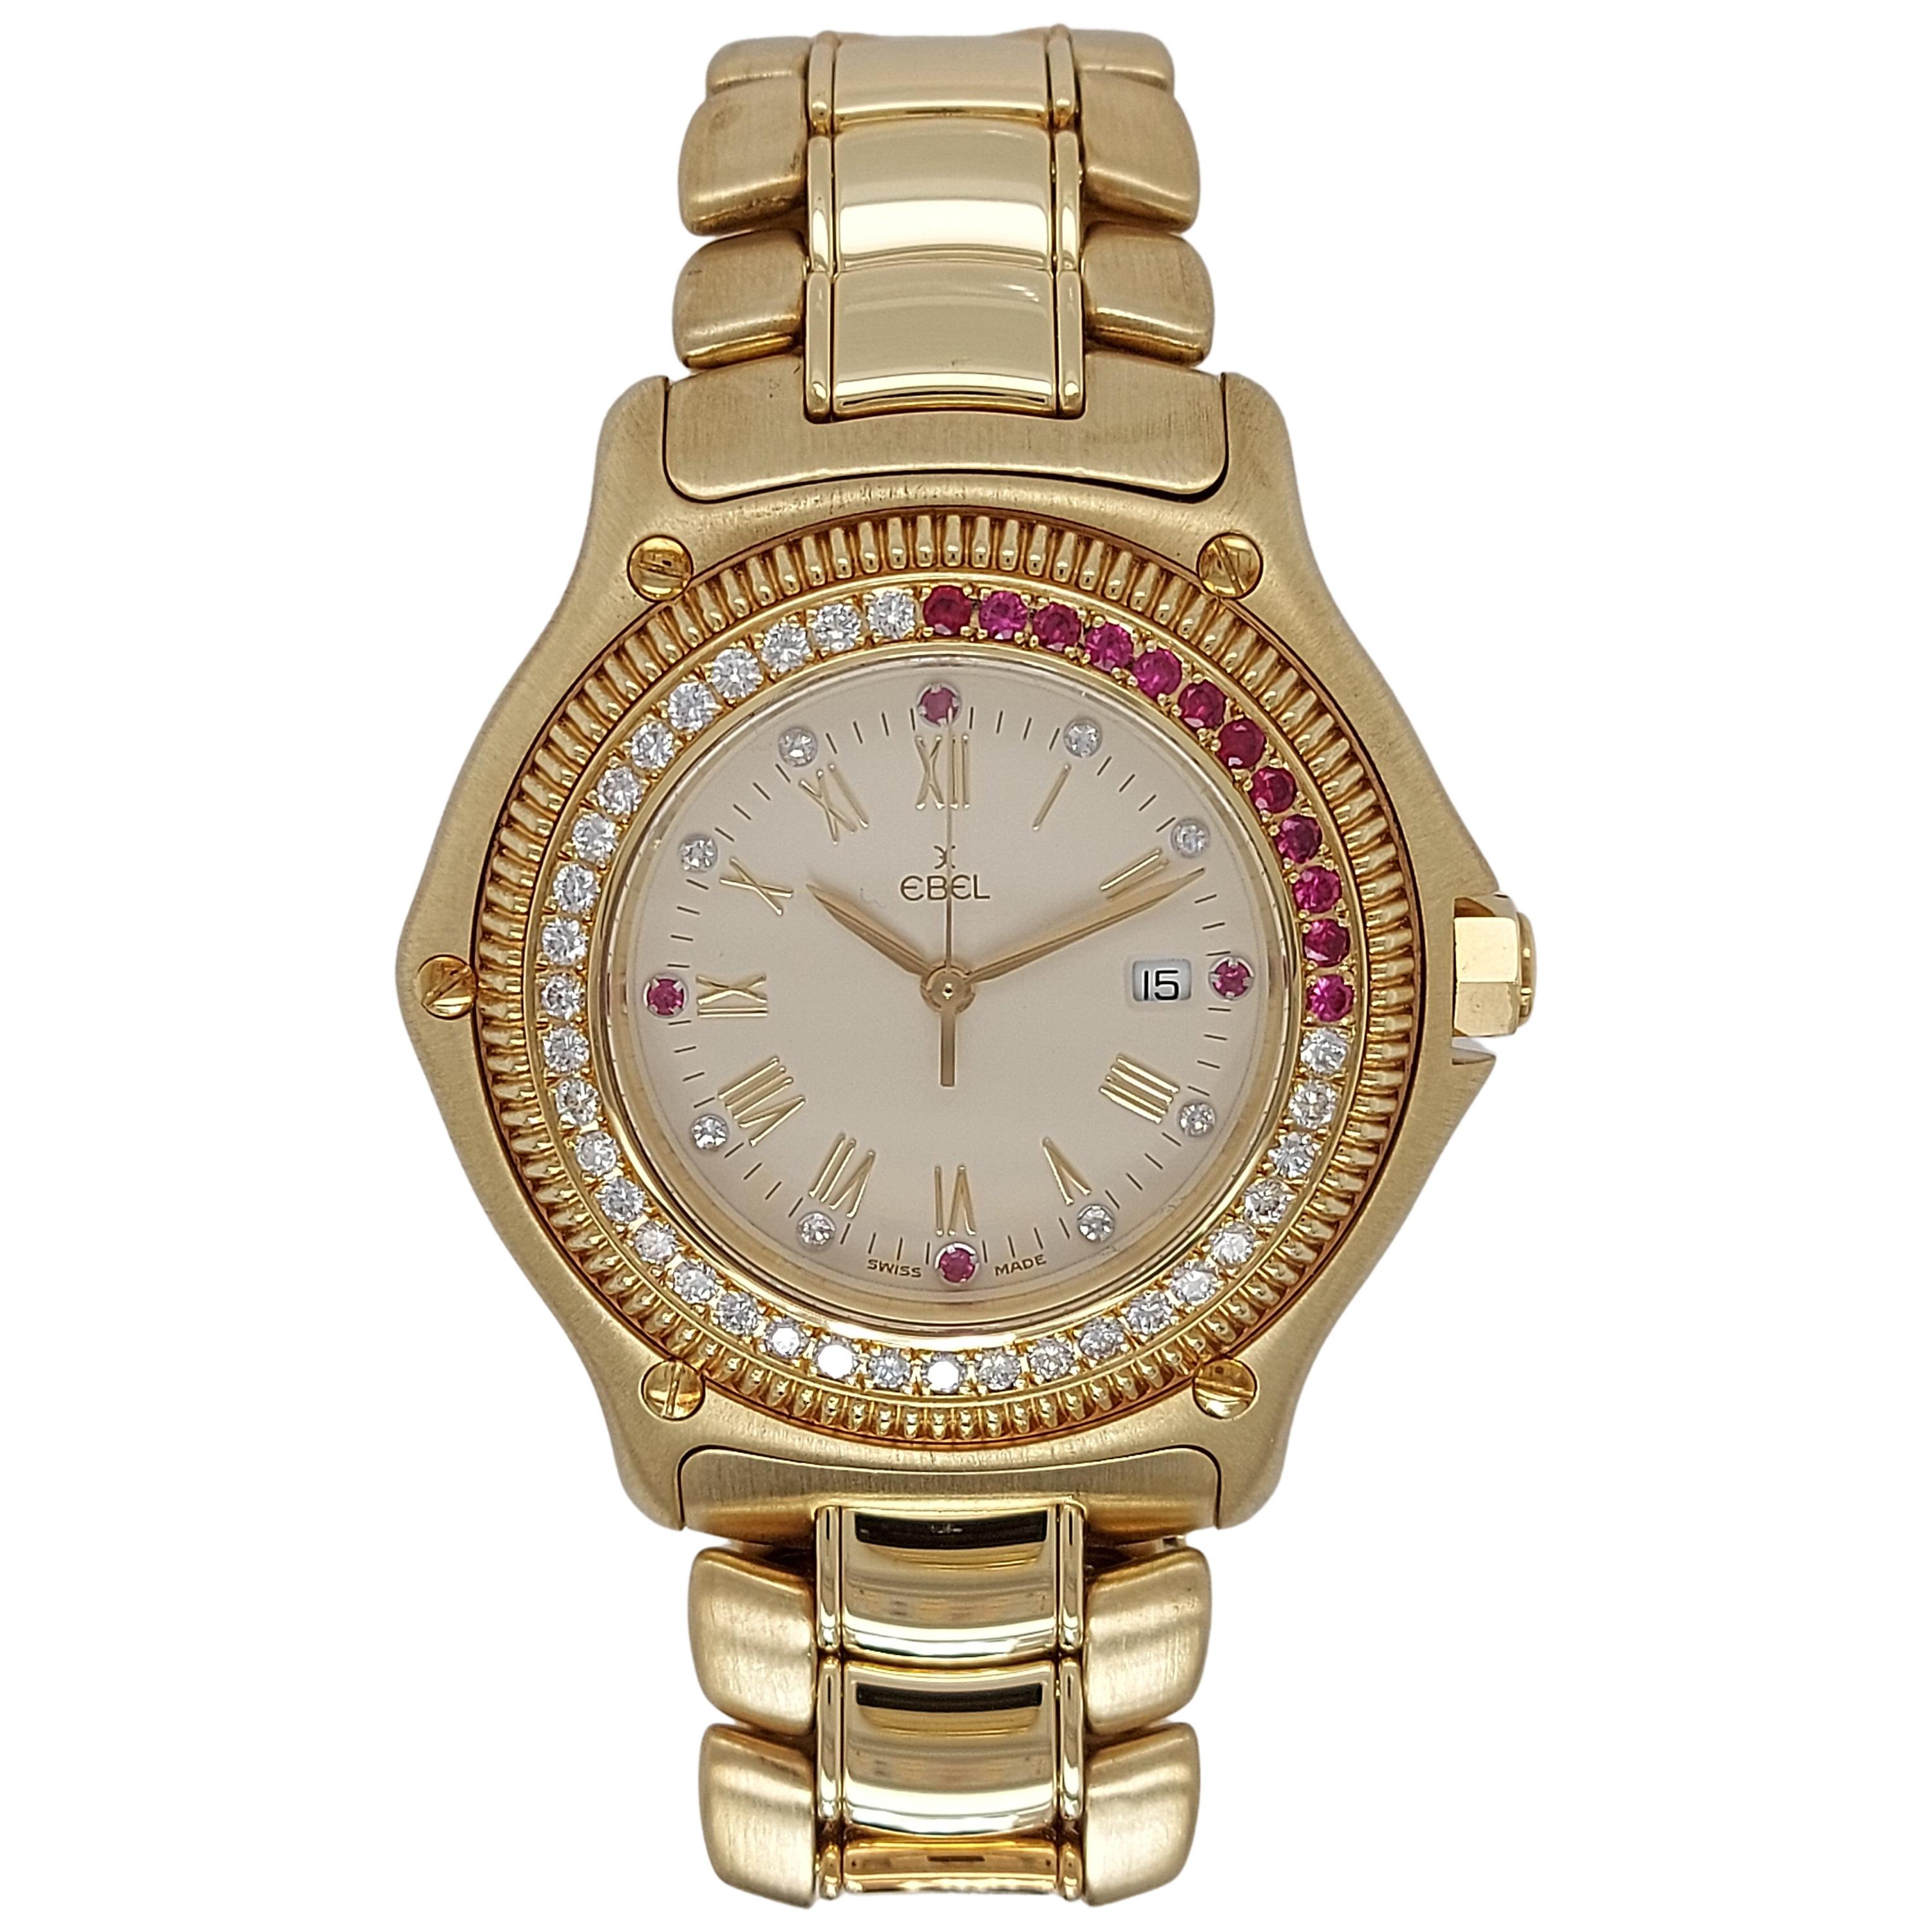 Ebel Discovery Wristwatch 883830, Diamonds and Rubies 18 Karat Gold Bracelet  For Sale at 1stDibs